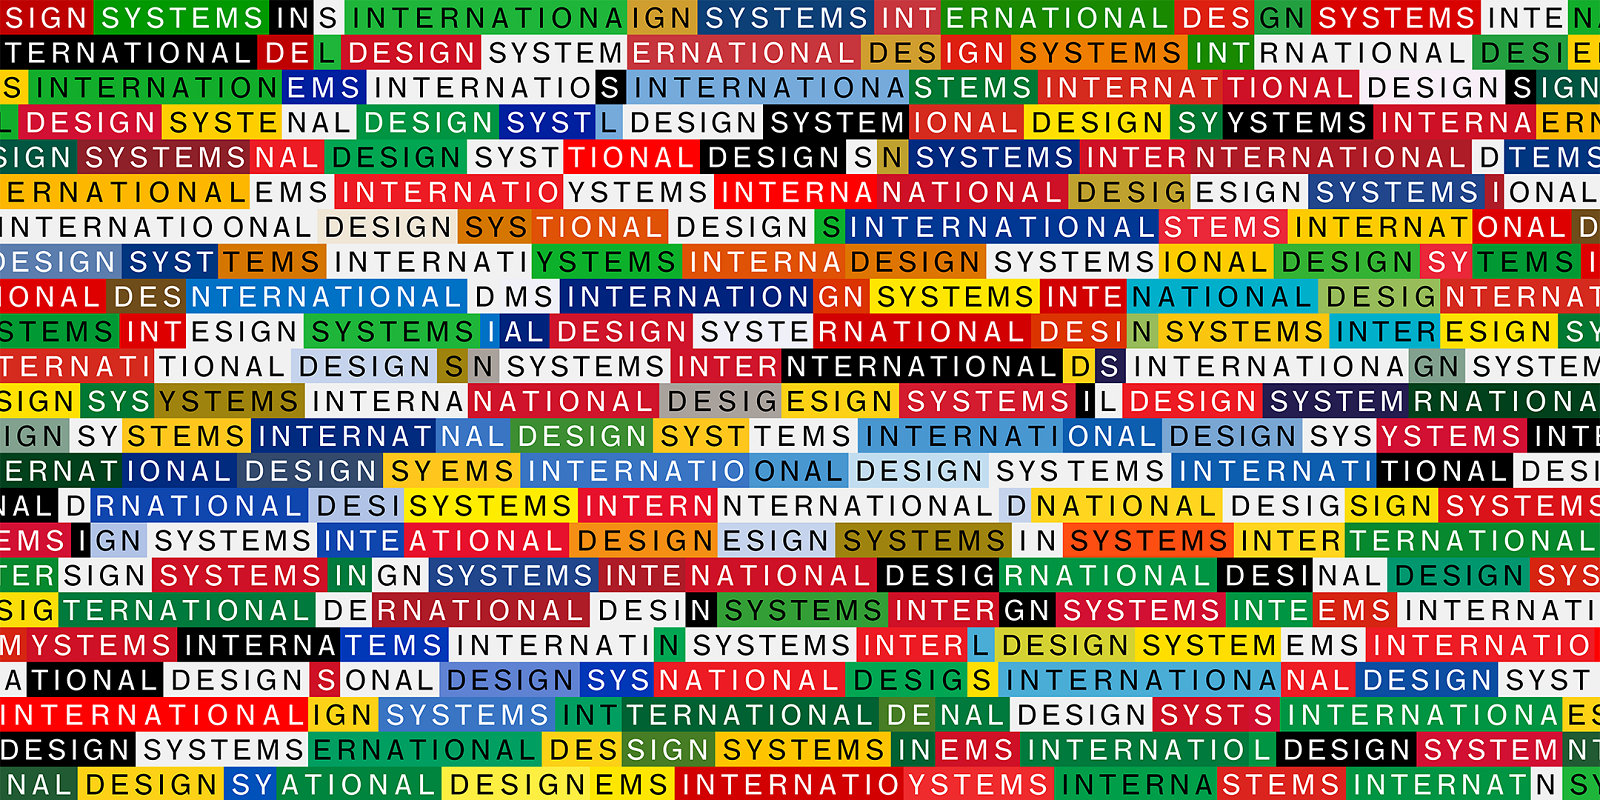 Image of Design Systems logo.